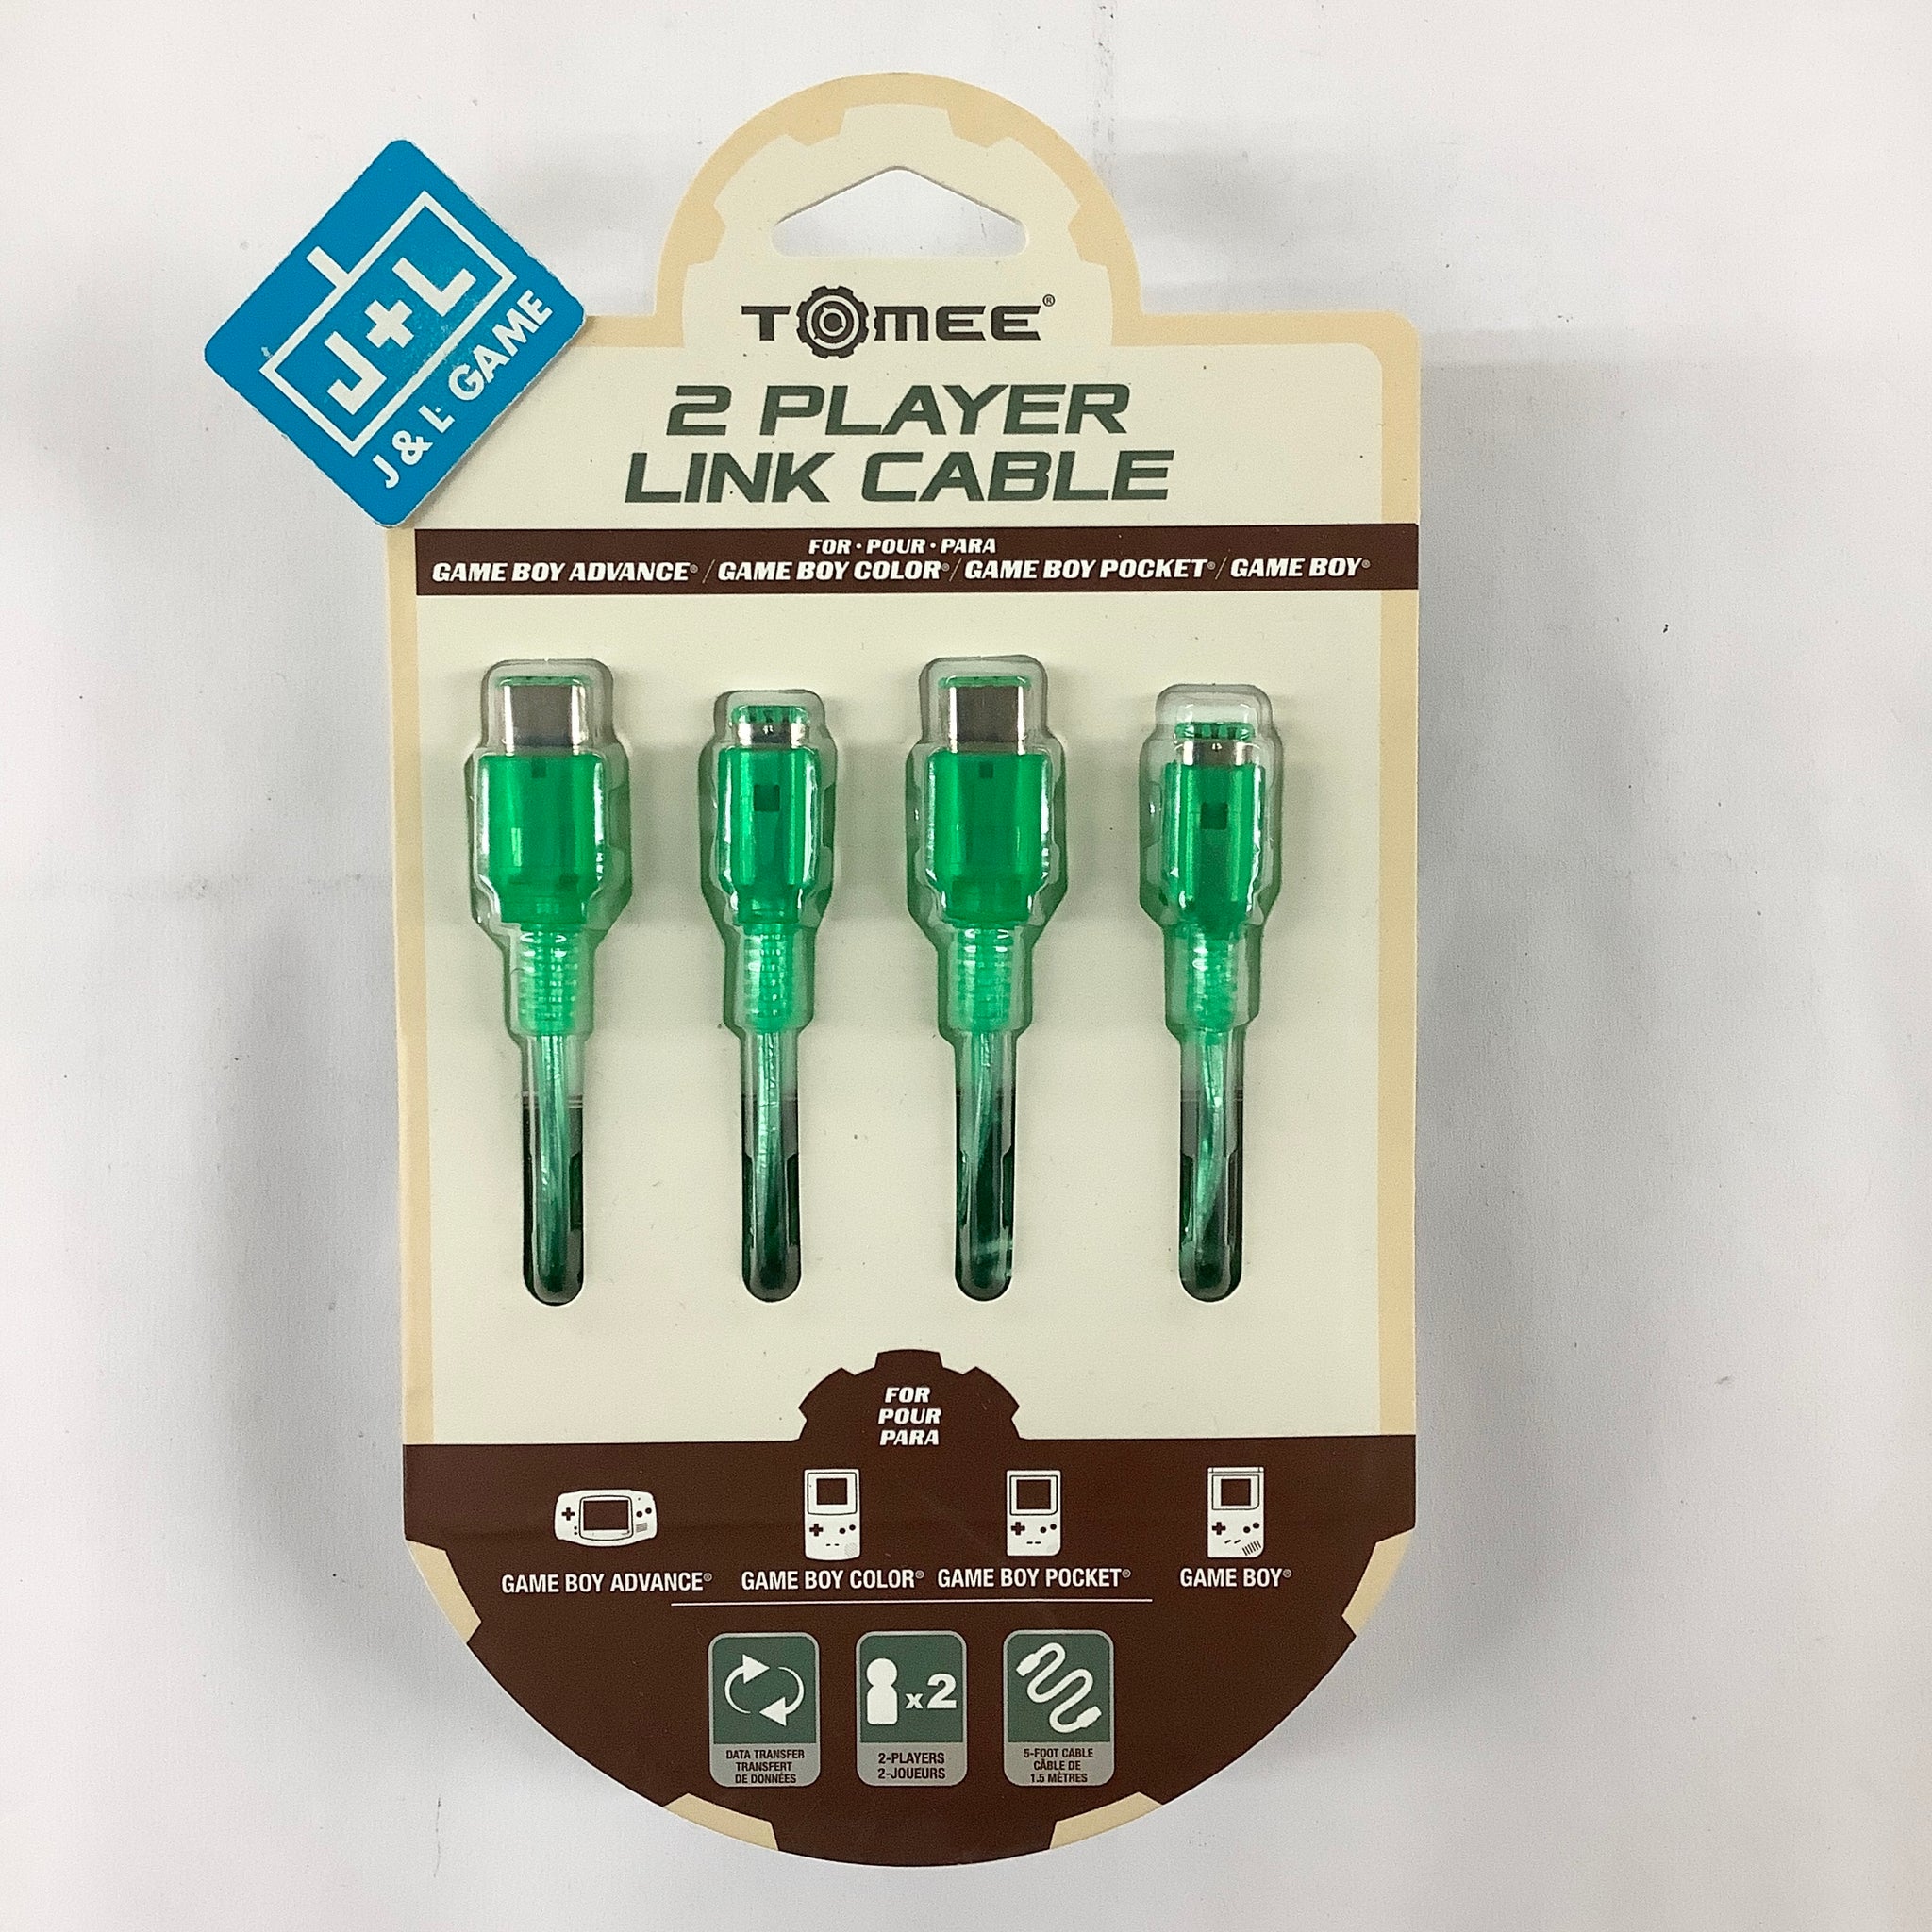 Tomee 2 Player Link Cable for GBC/GBP/GB - (GBC) Game Boy Color Accessories Tomee   